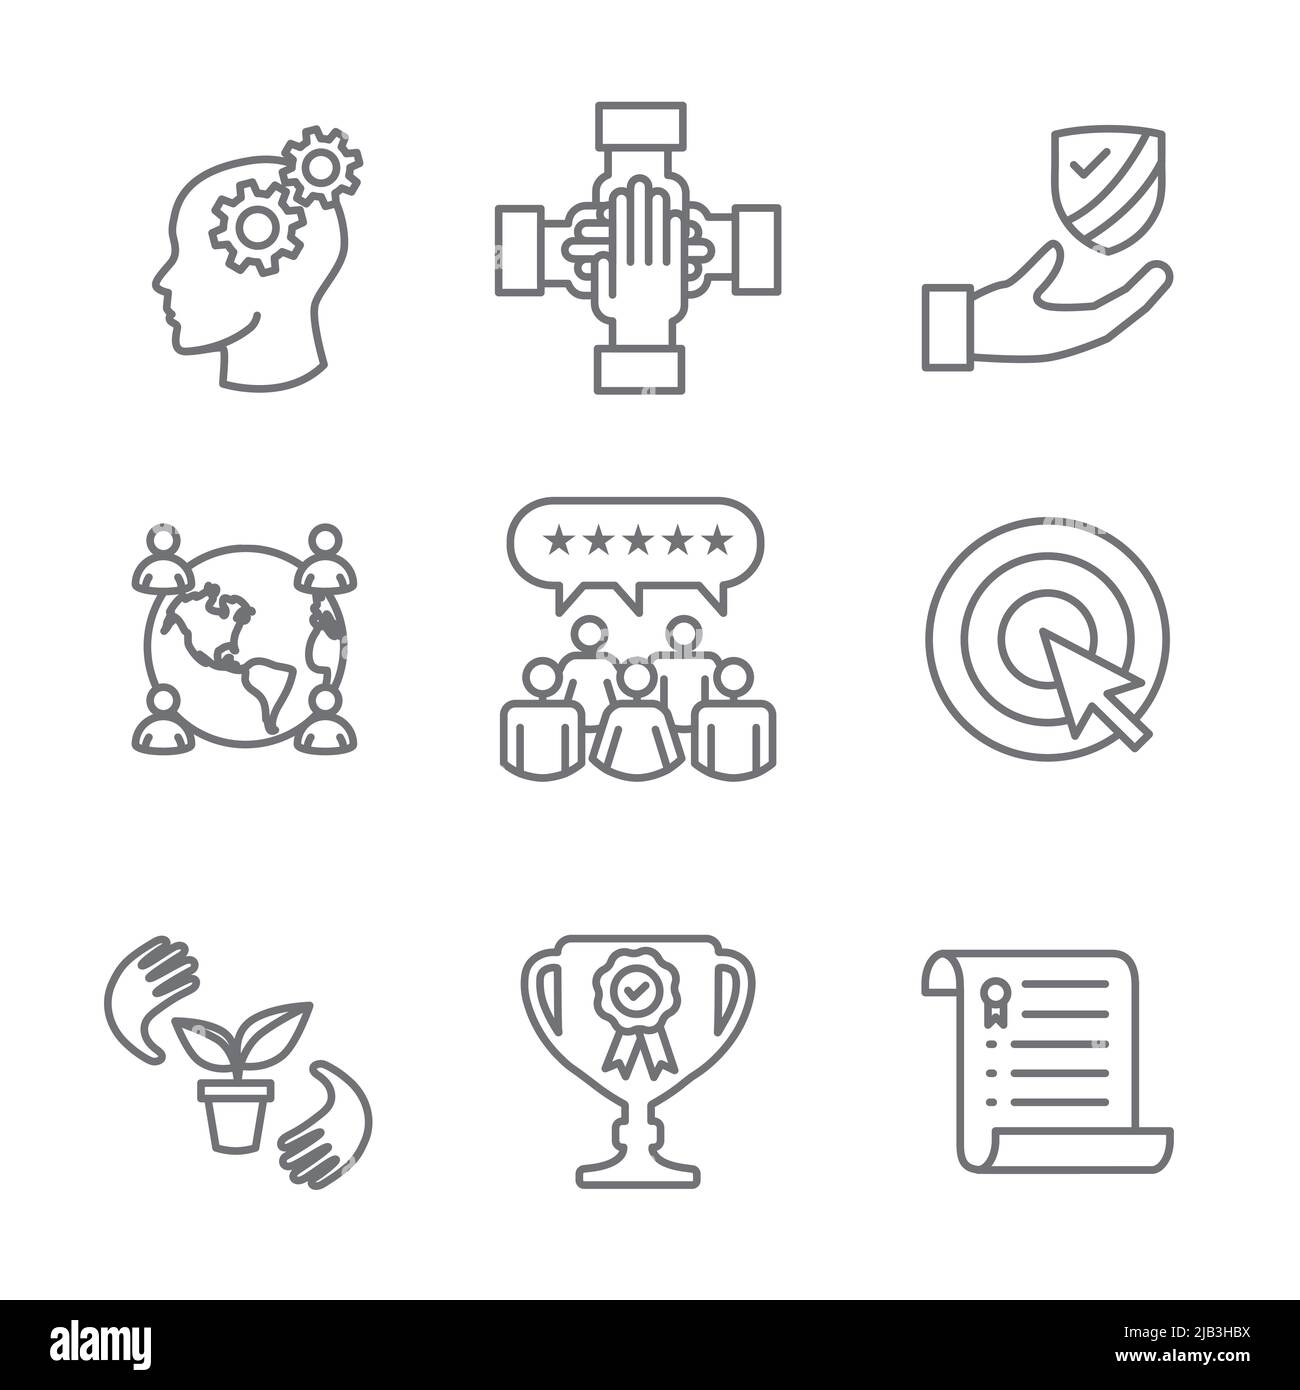 Core Values or Mission with Vision Icon Set Stock Vector